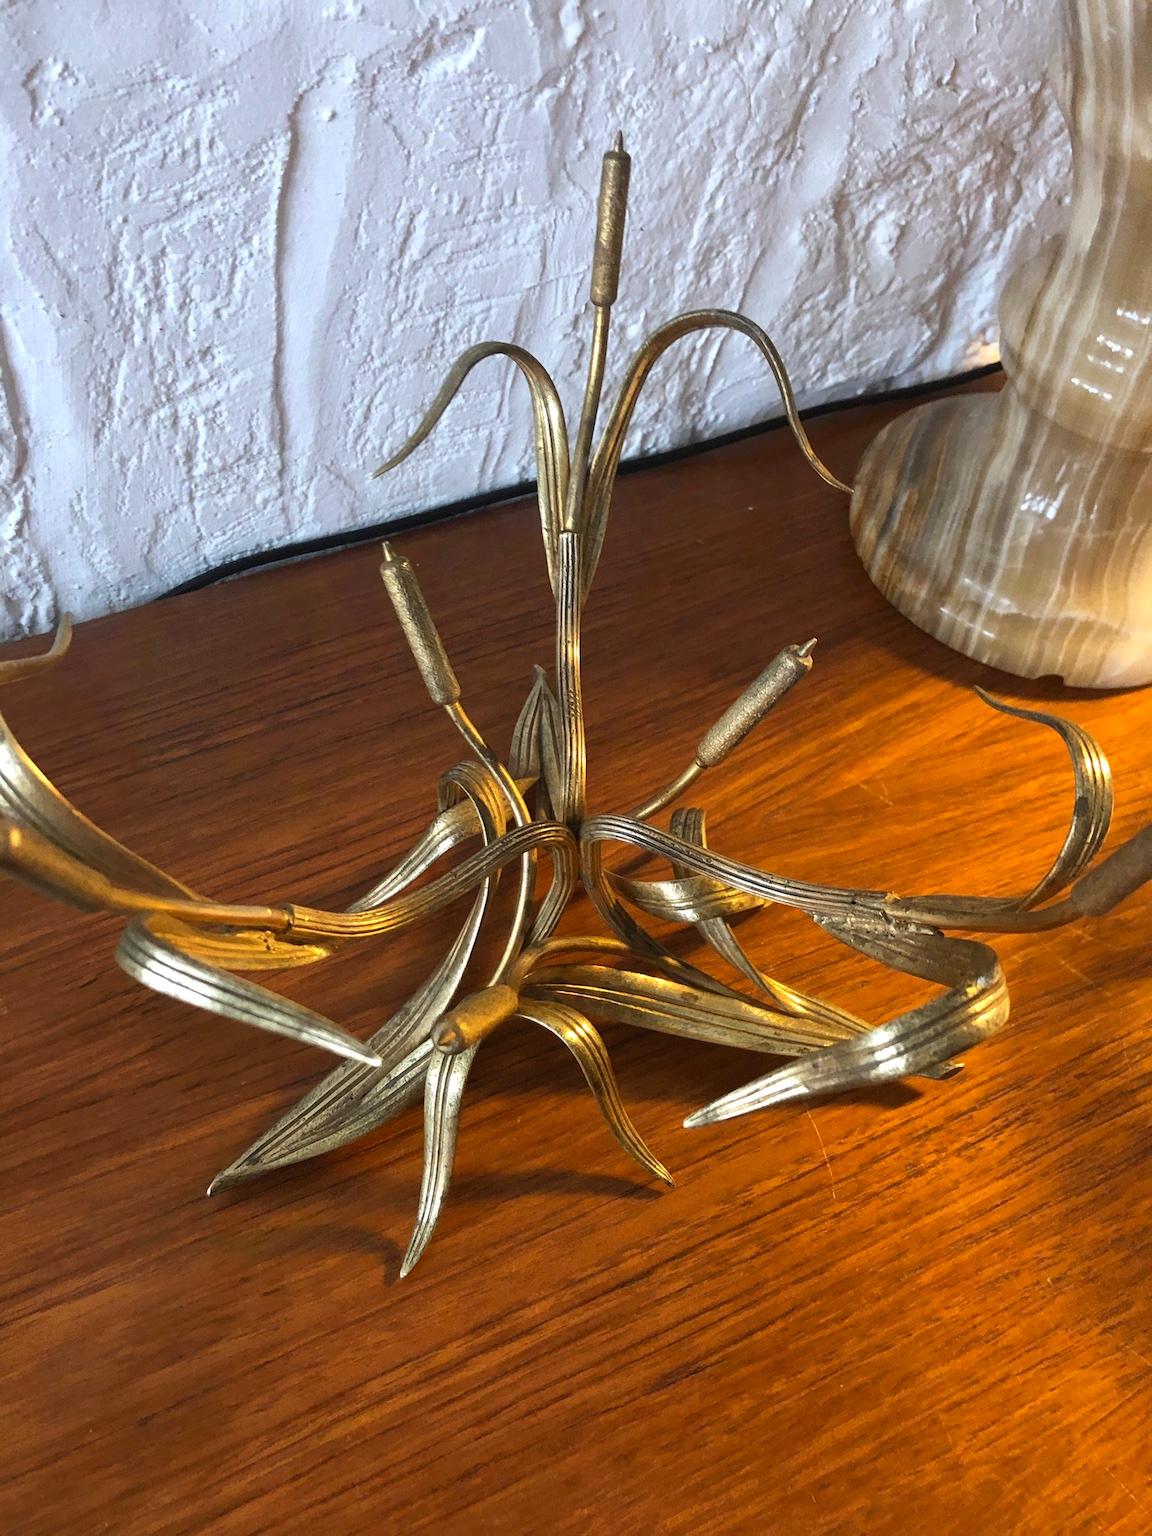 Mid-20th Century Rare Thomas Webb Cut Glass Centrepiece Bowl on Gilt Bronze Stand, England, 1950s For Sale